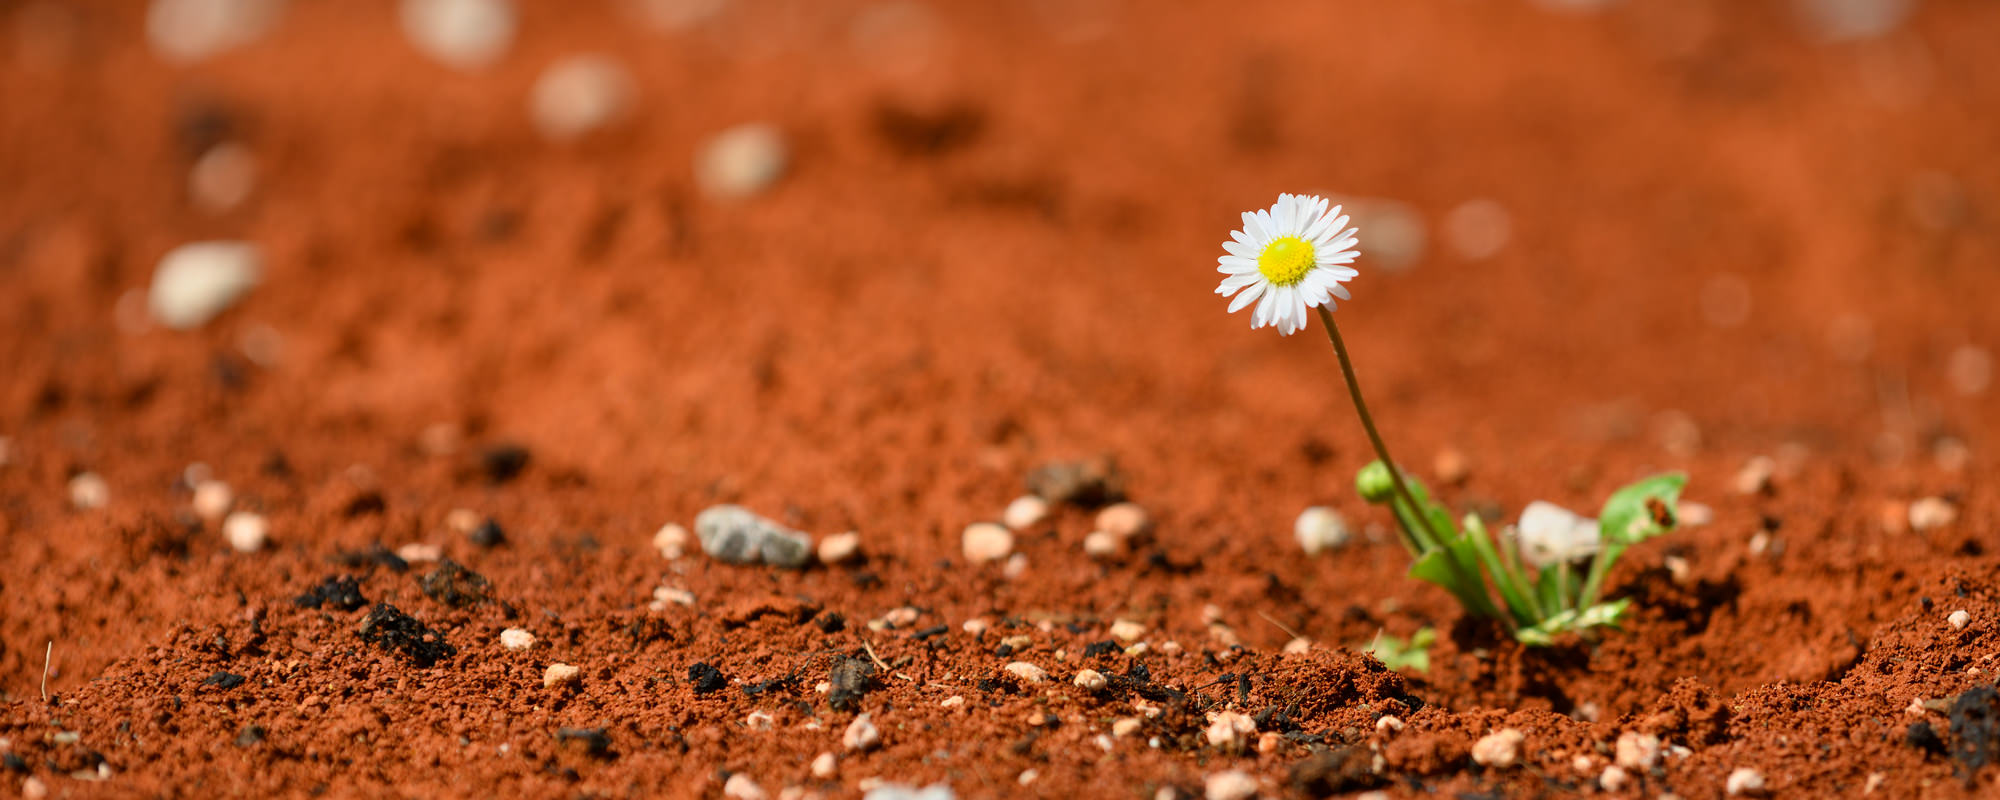 Resilient daisy in the dirt